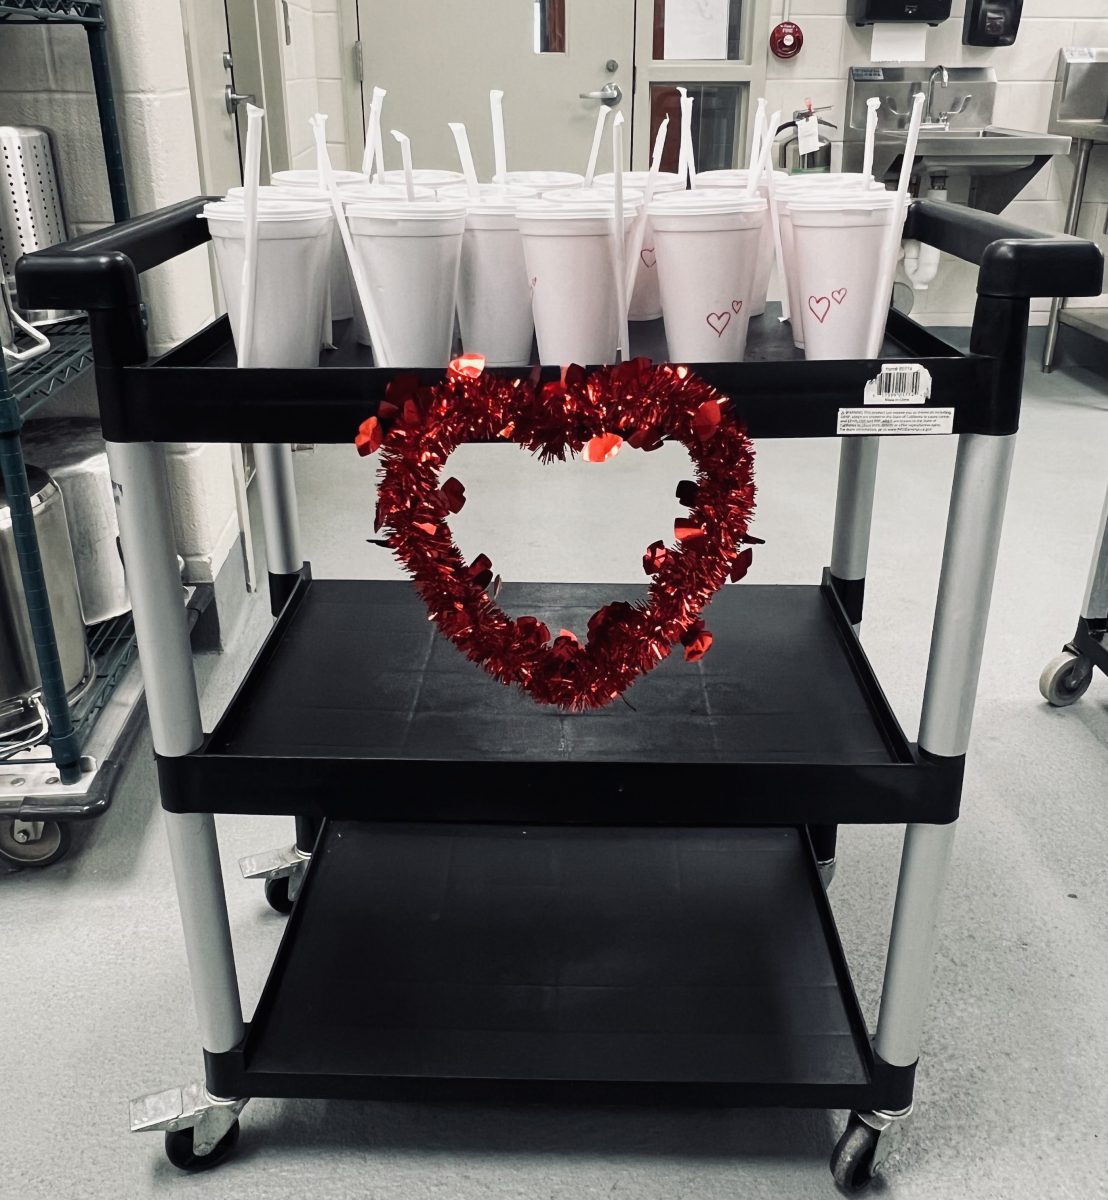 Culinarys+sweet+tea+cart%2C+decked+out+for+Valentines+Day.+Photo+courtesy+of+Camille+Bradshaw.